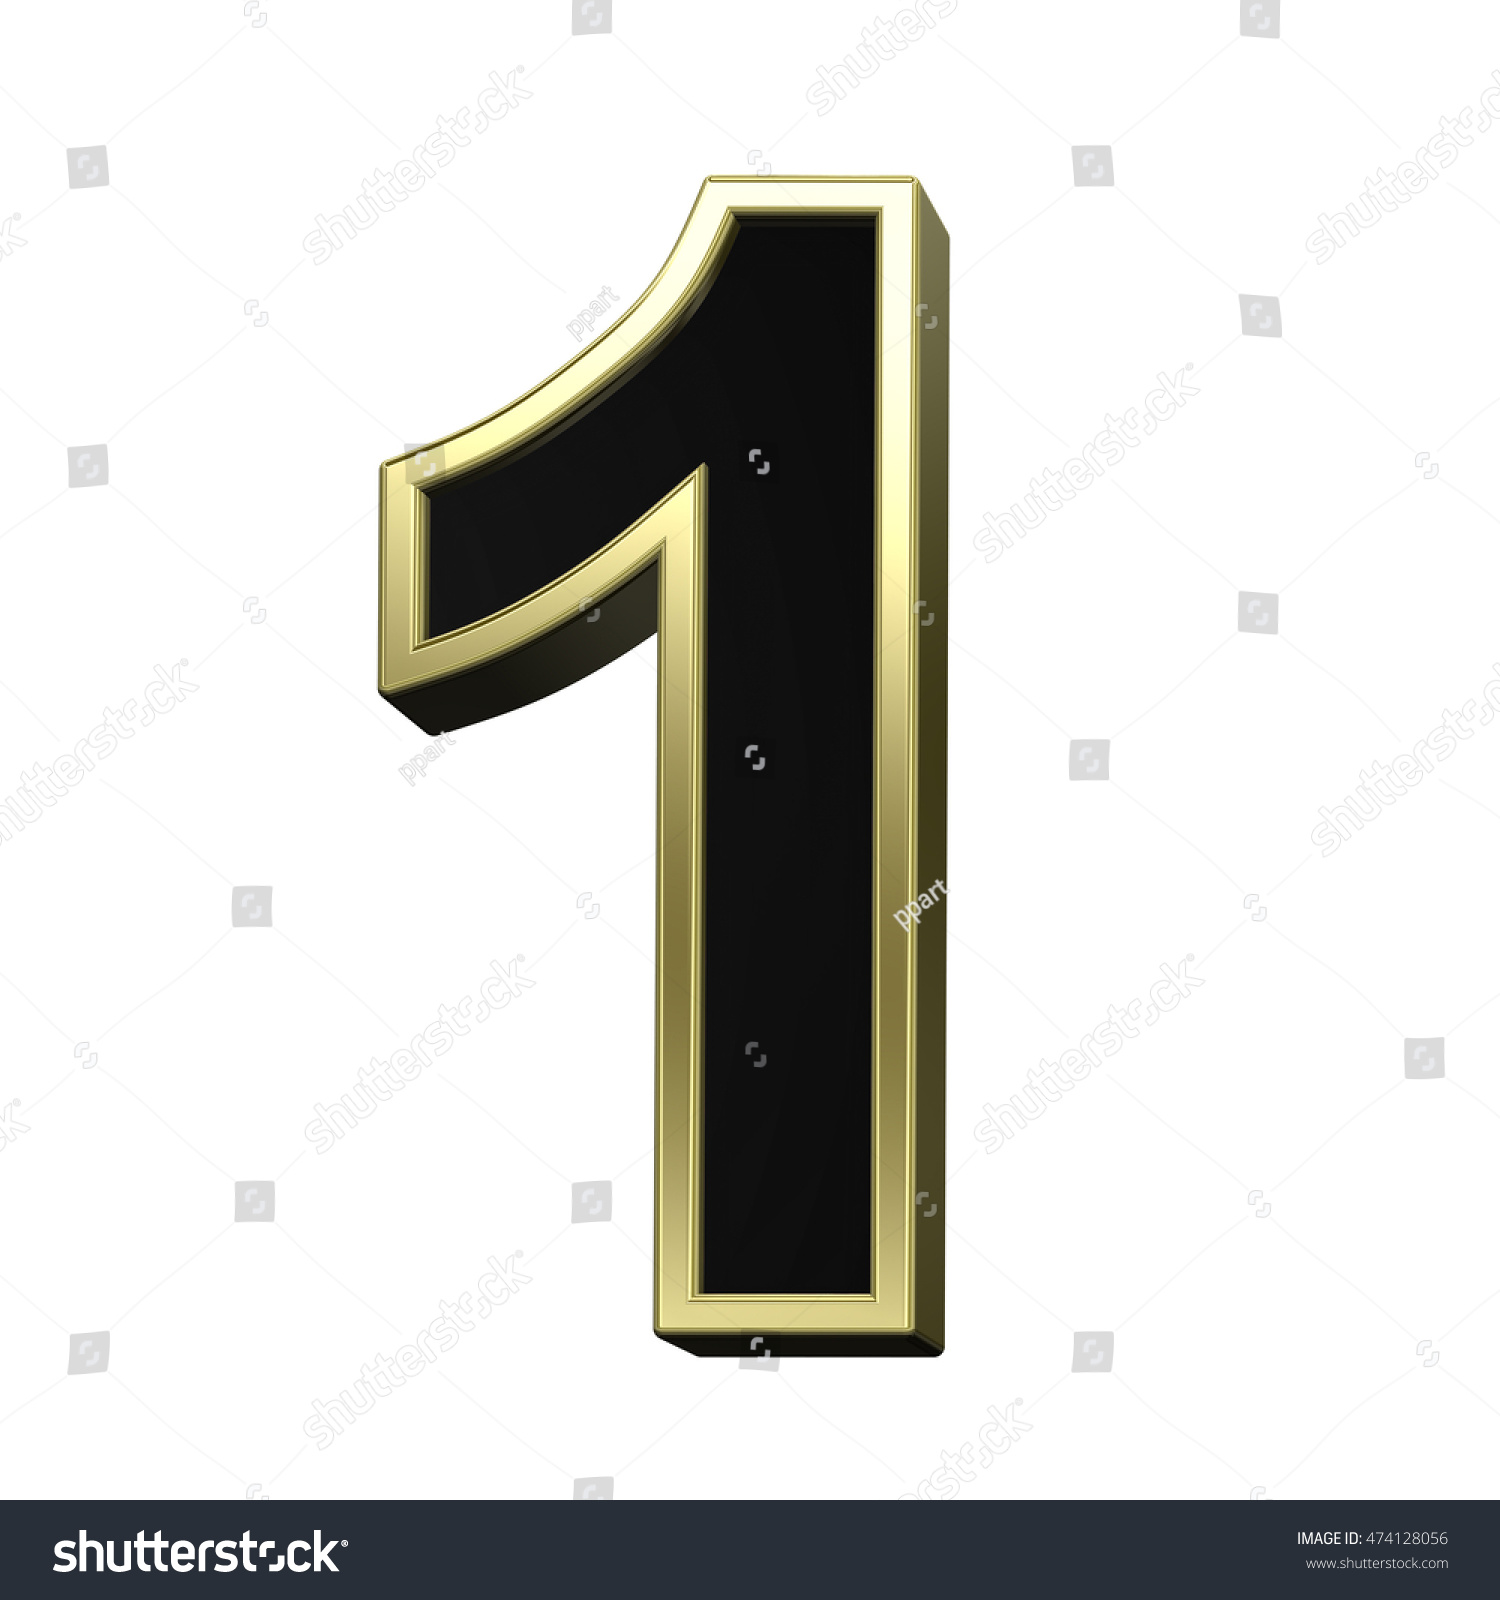 3d gold number one 1 isolated stock illustration 1266054043 shutterstock